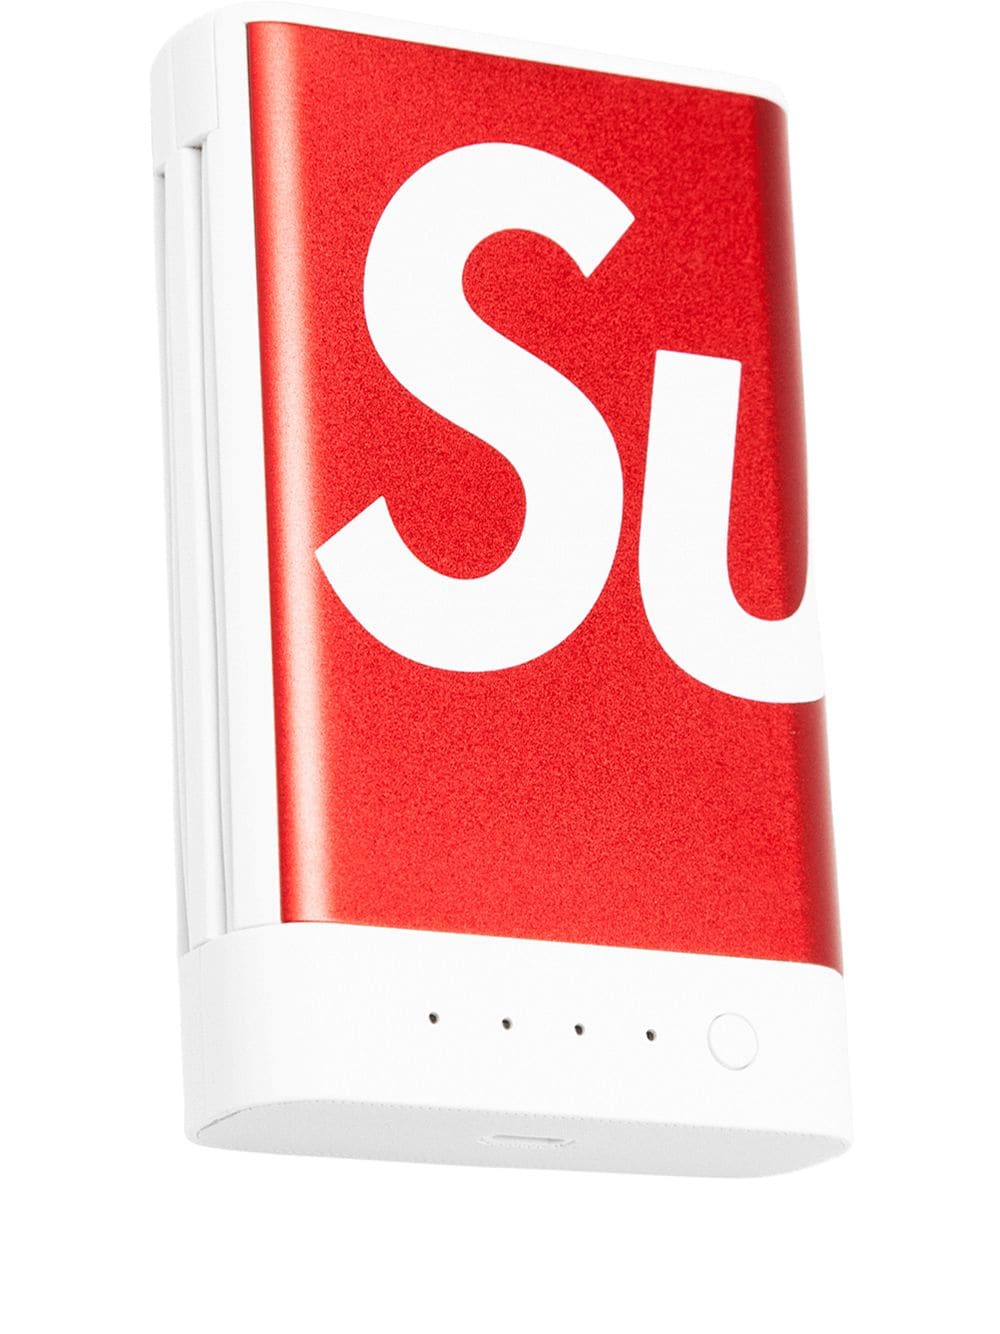 Supreme mophie encore 10K モバイルバッテリー-